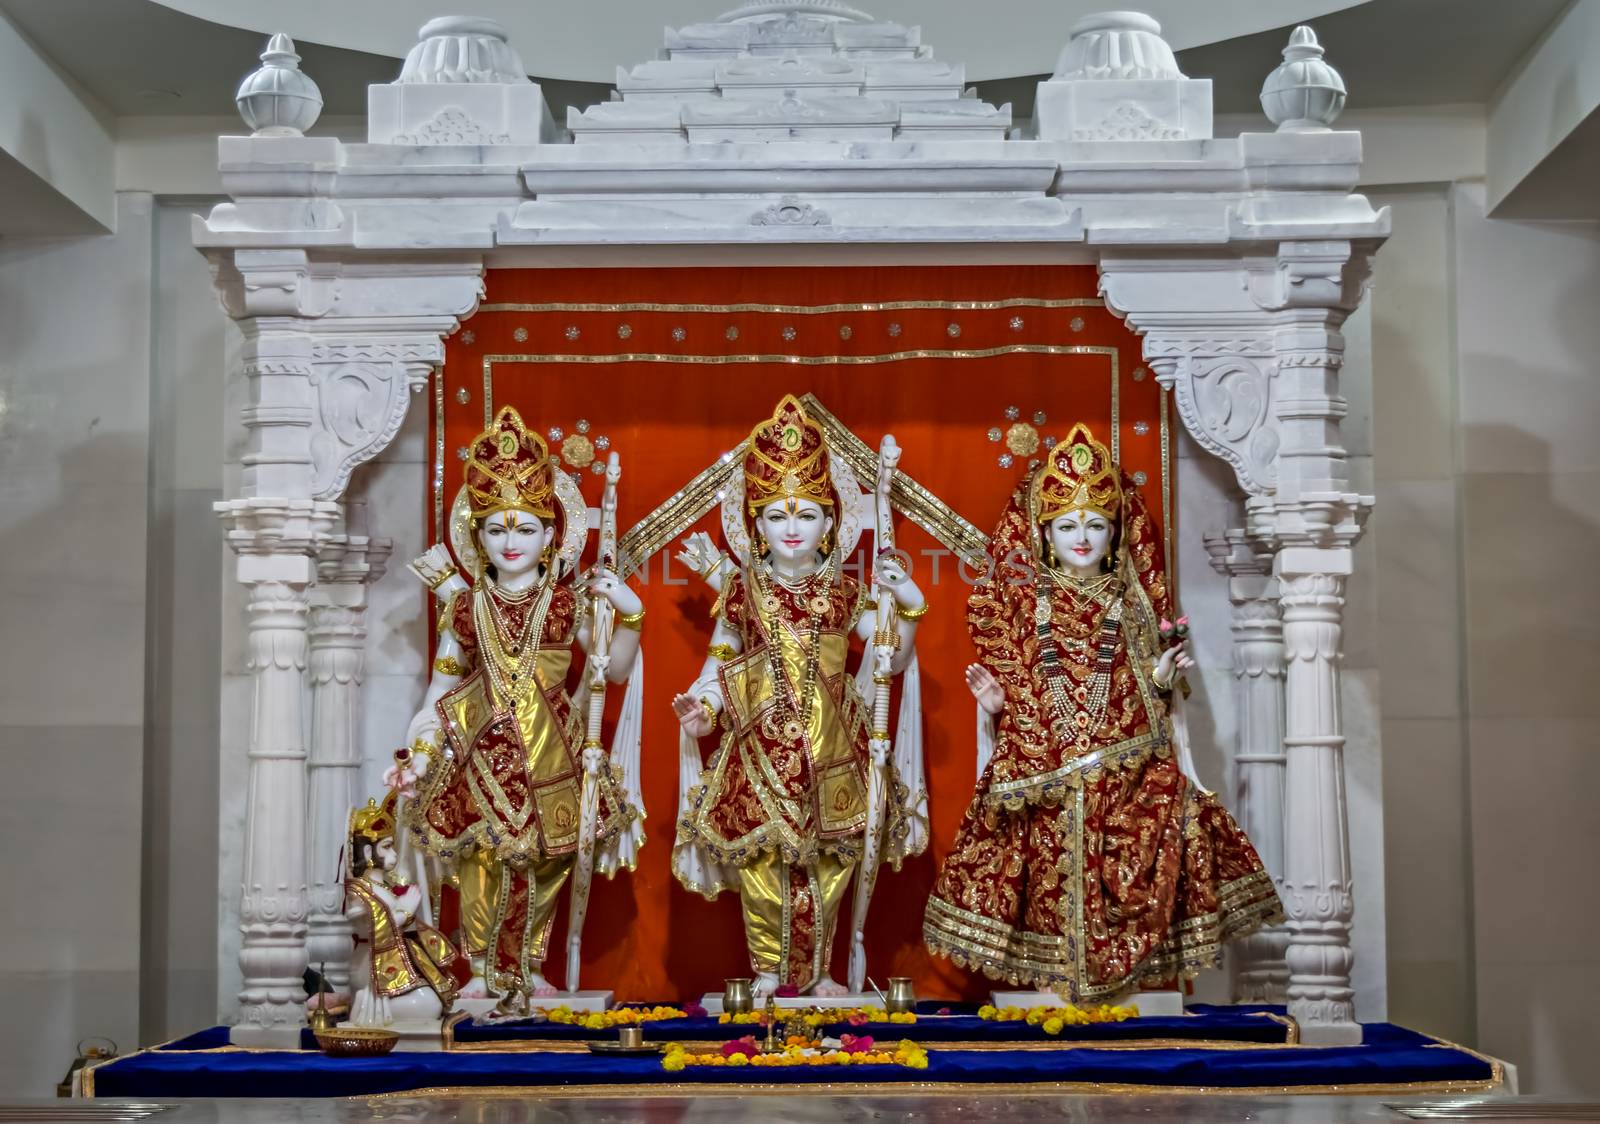 Decorated idols of Hindu Gods Ram, Lakshman & Godless Sita together in a temple at Somnath, Gujrat, India. by lalam